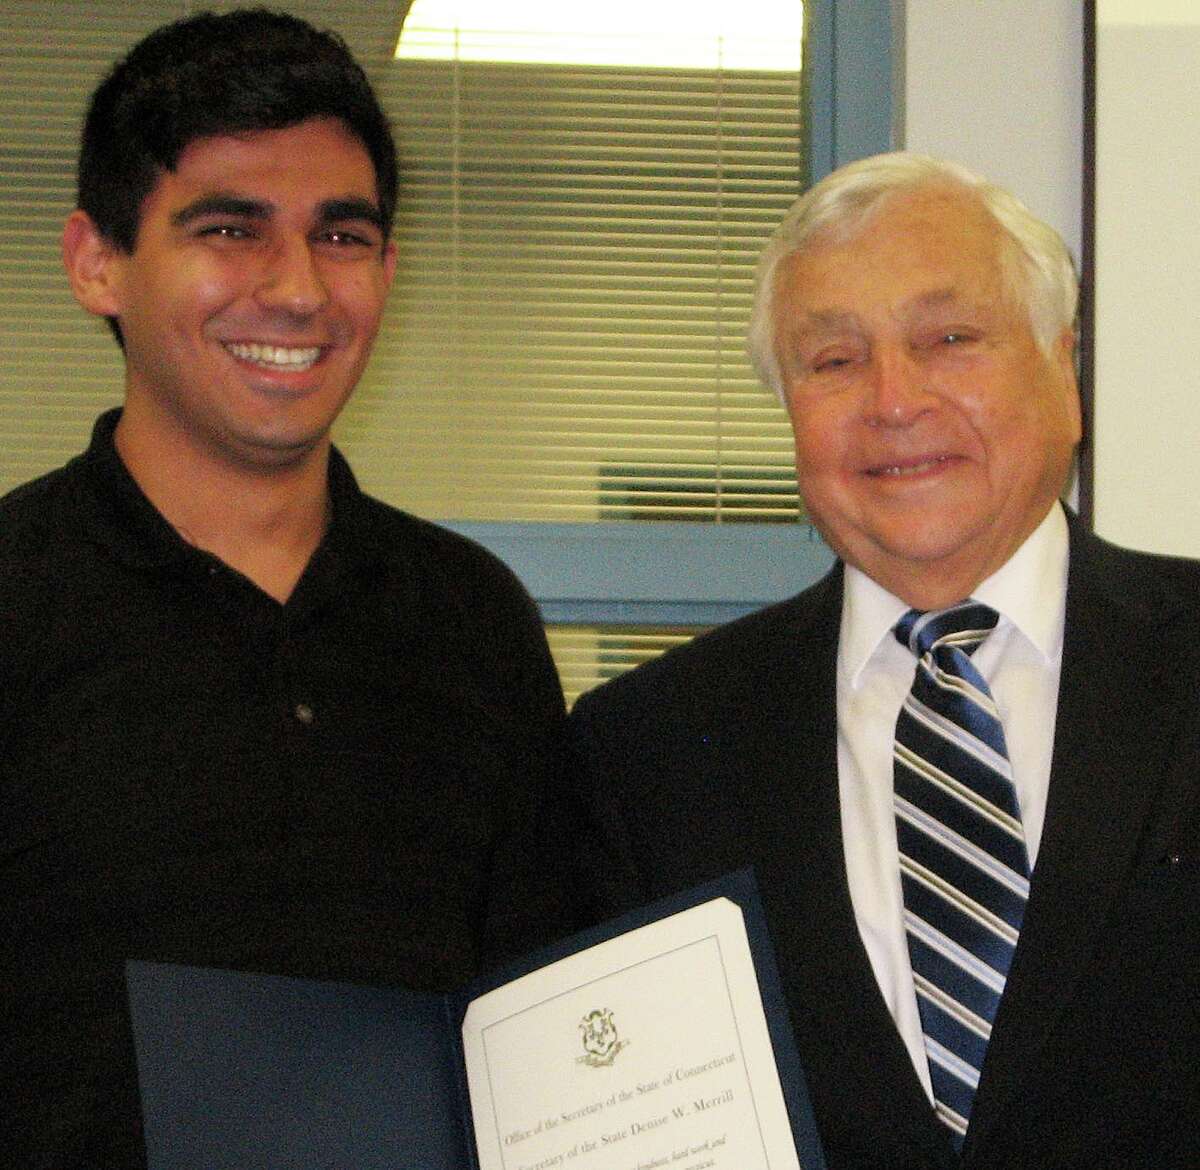 Jaime Bairaktaris, left, a Staples High School senior, with Superintendent of Schools Elliott Landon, has received a Certificate of Recognition from the Secretary of the State and the Connecticut Citizenship Fund.